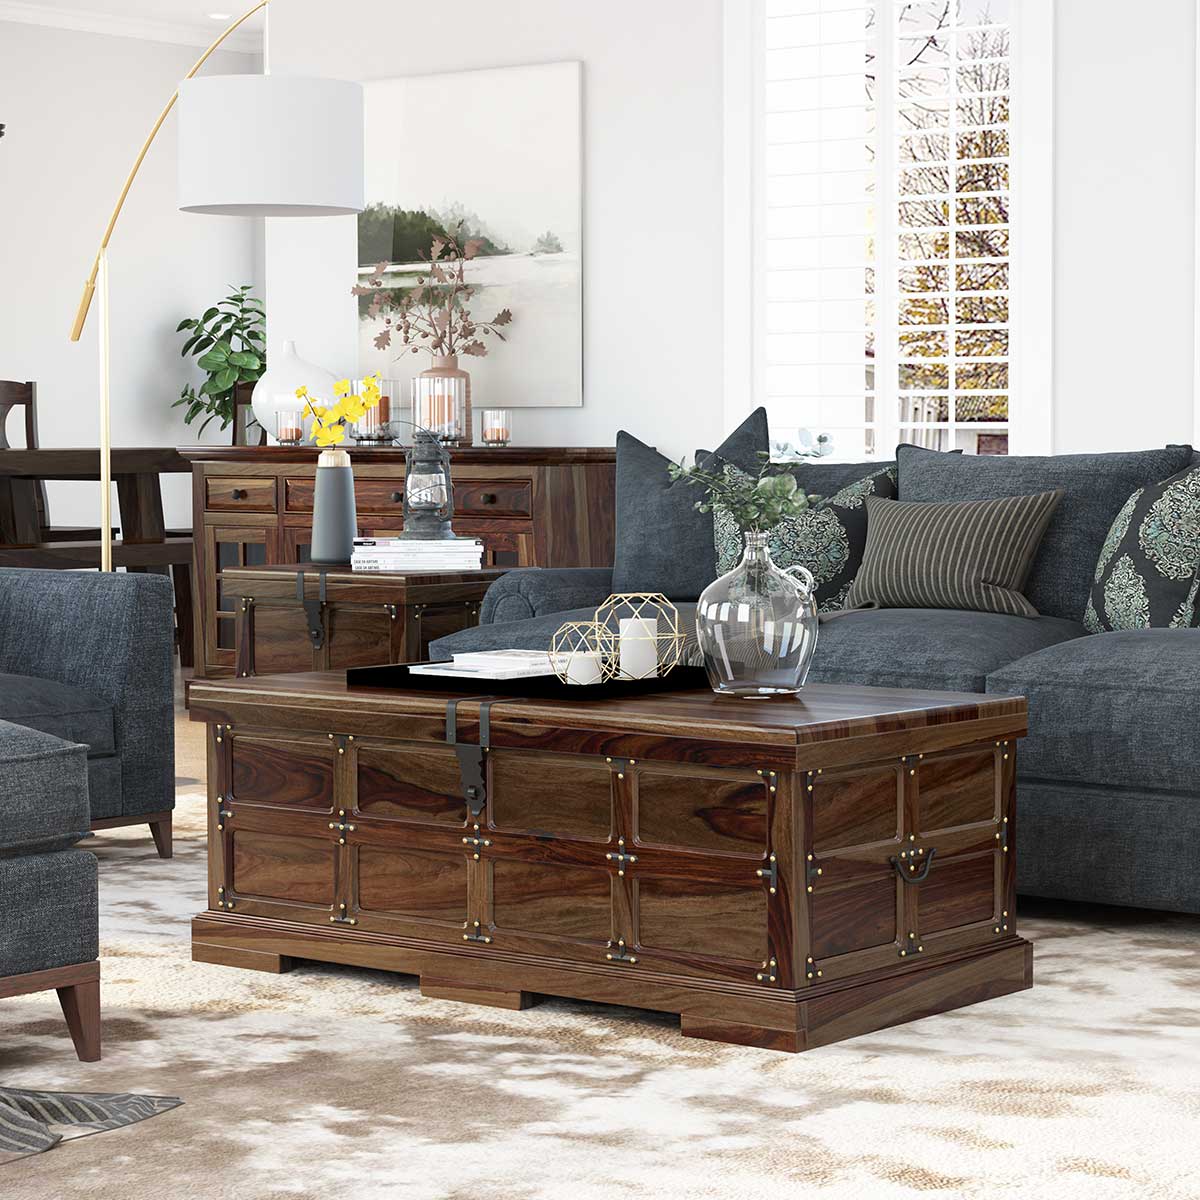 Antique wood trunk or chest used as a coffee table in a living area.  Beautiful! Rustic farmho…